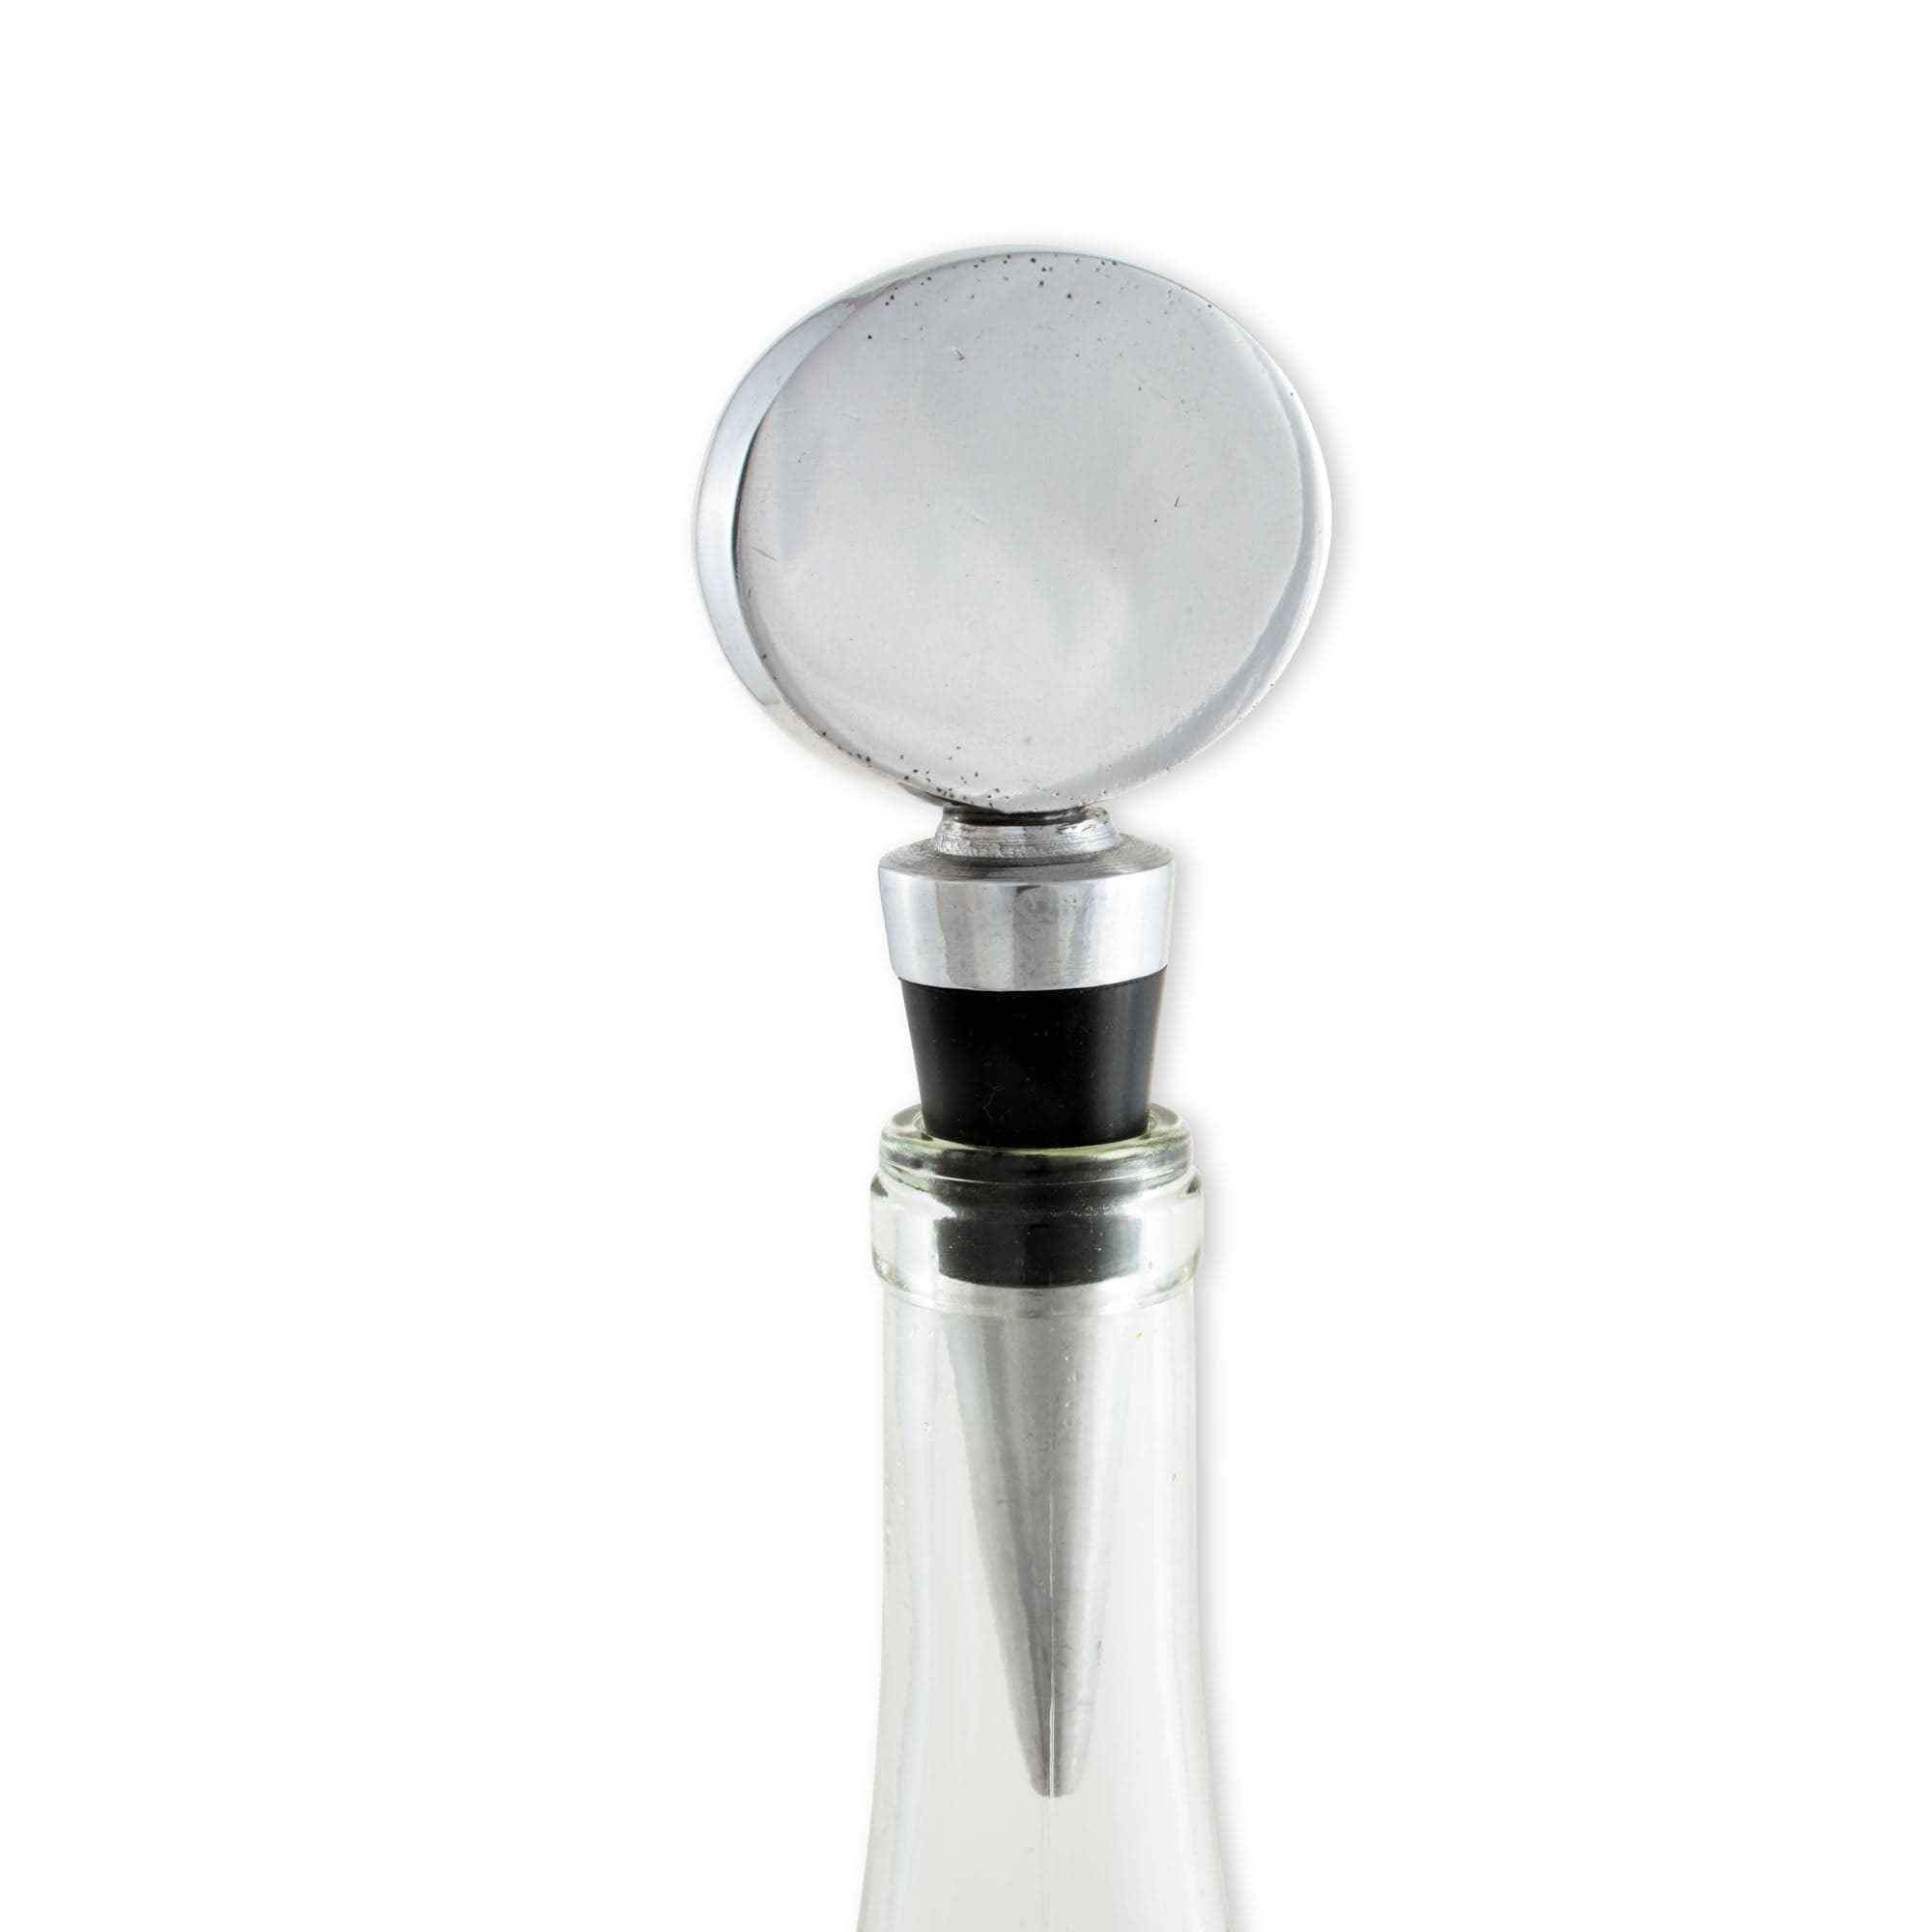 Bottle Stoppers